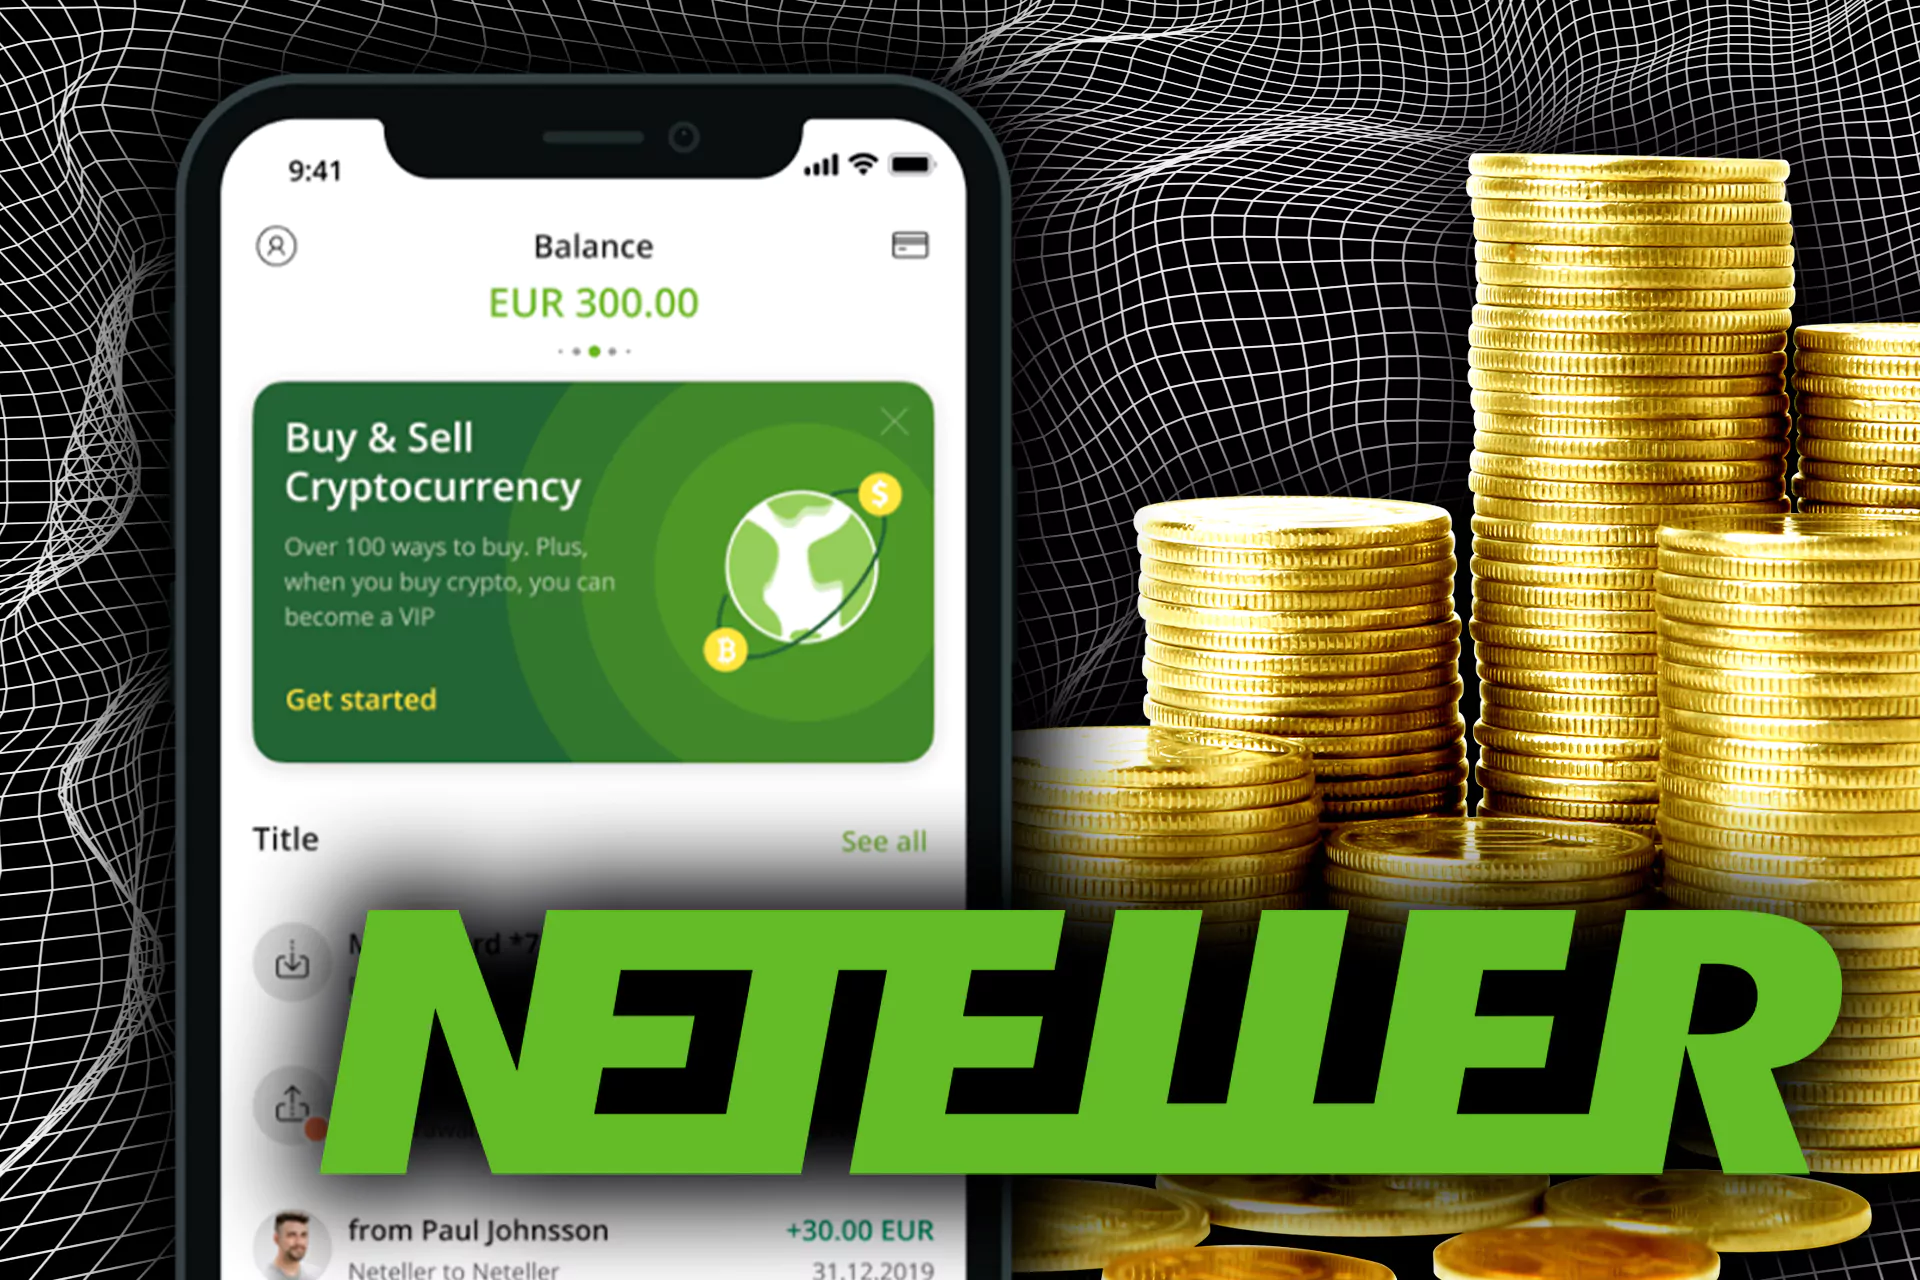 Use Neteller for instant payments.